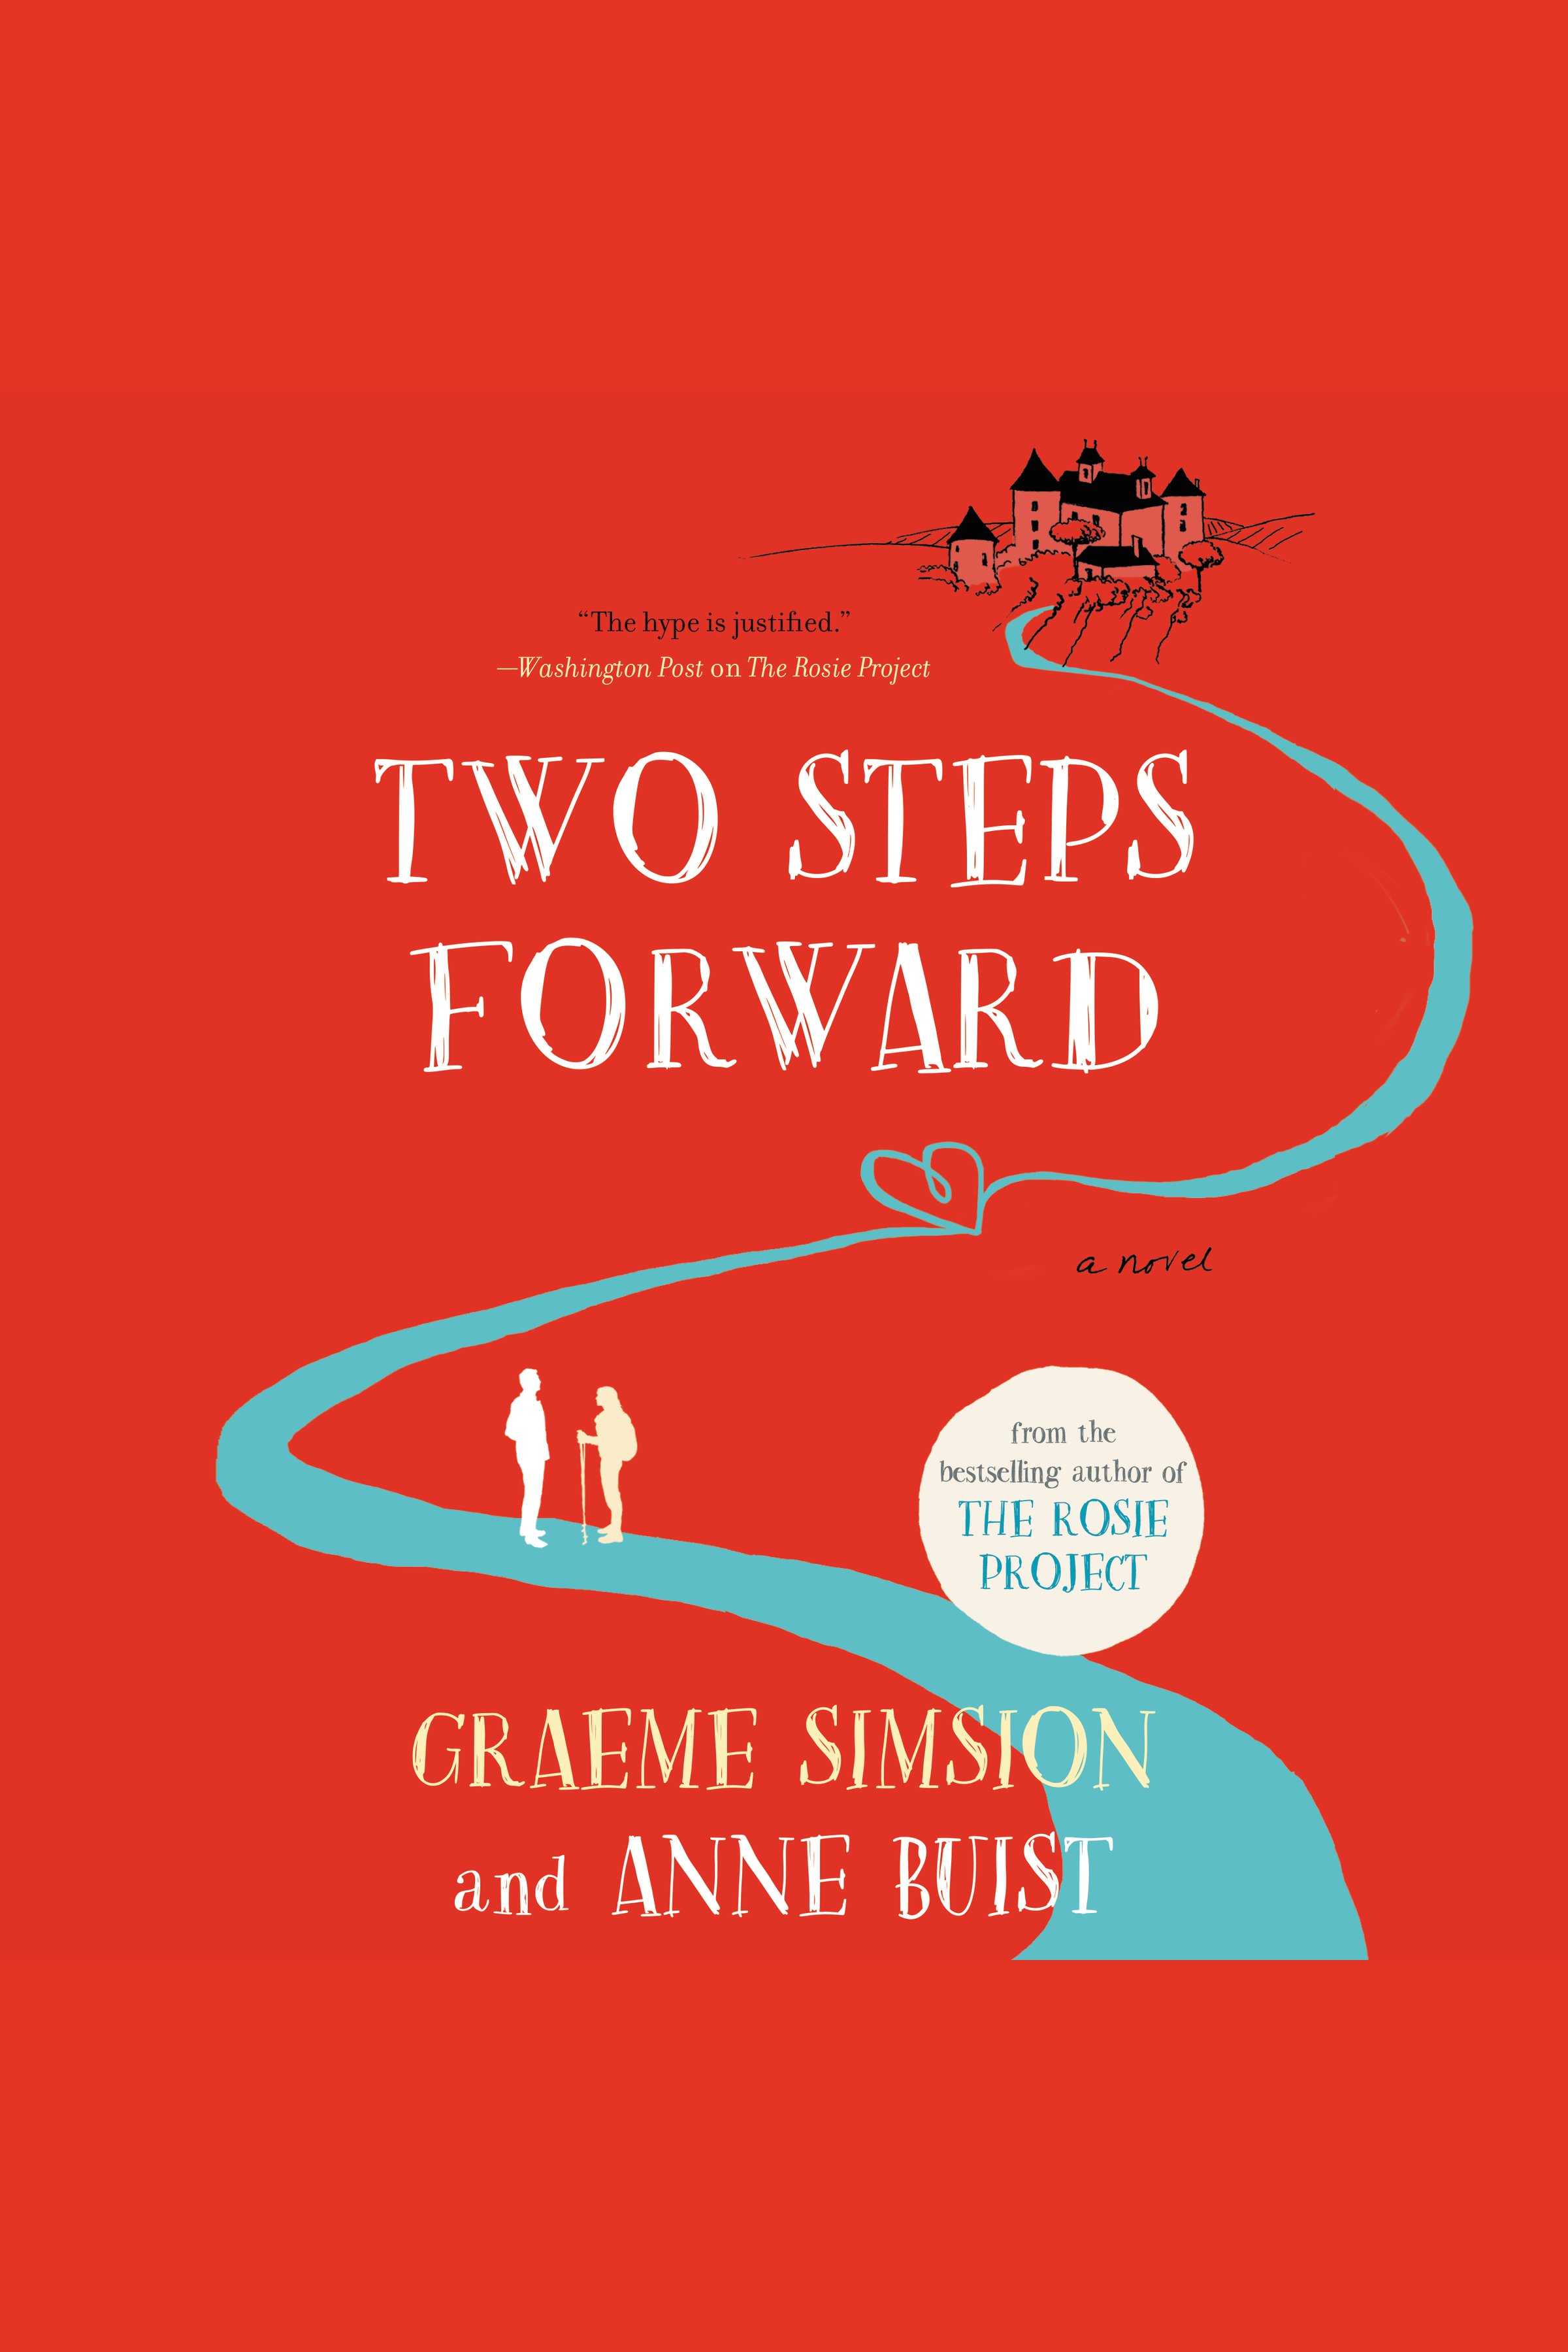 Two steps forward cover image